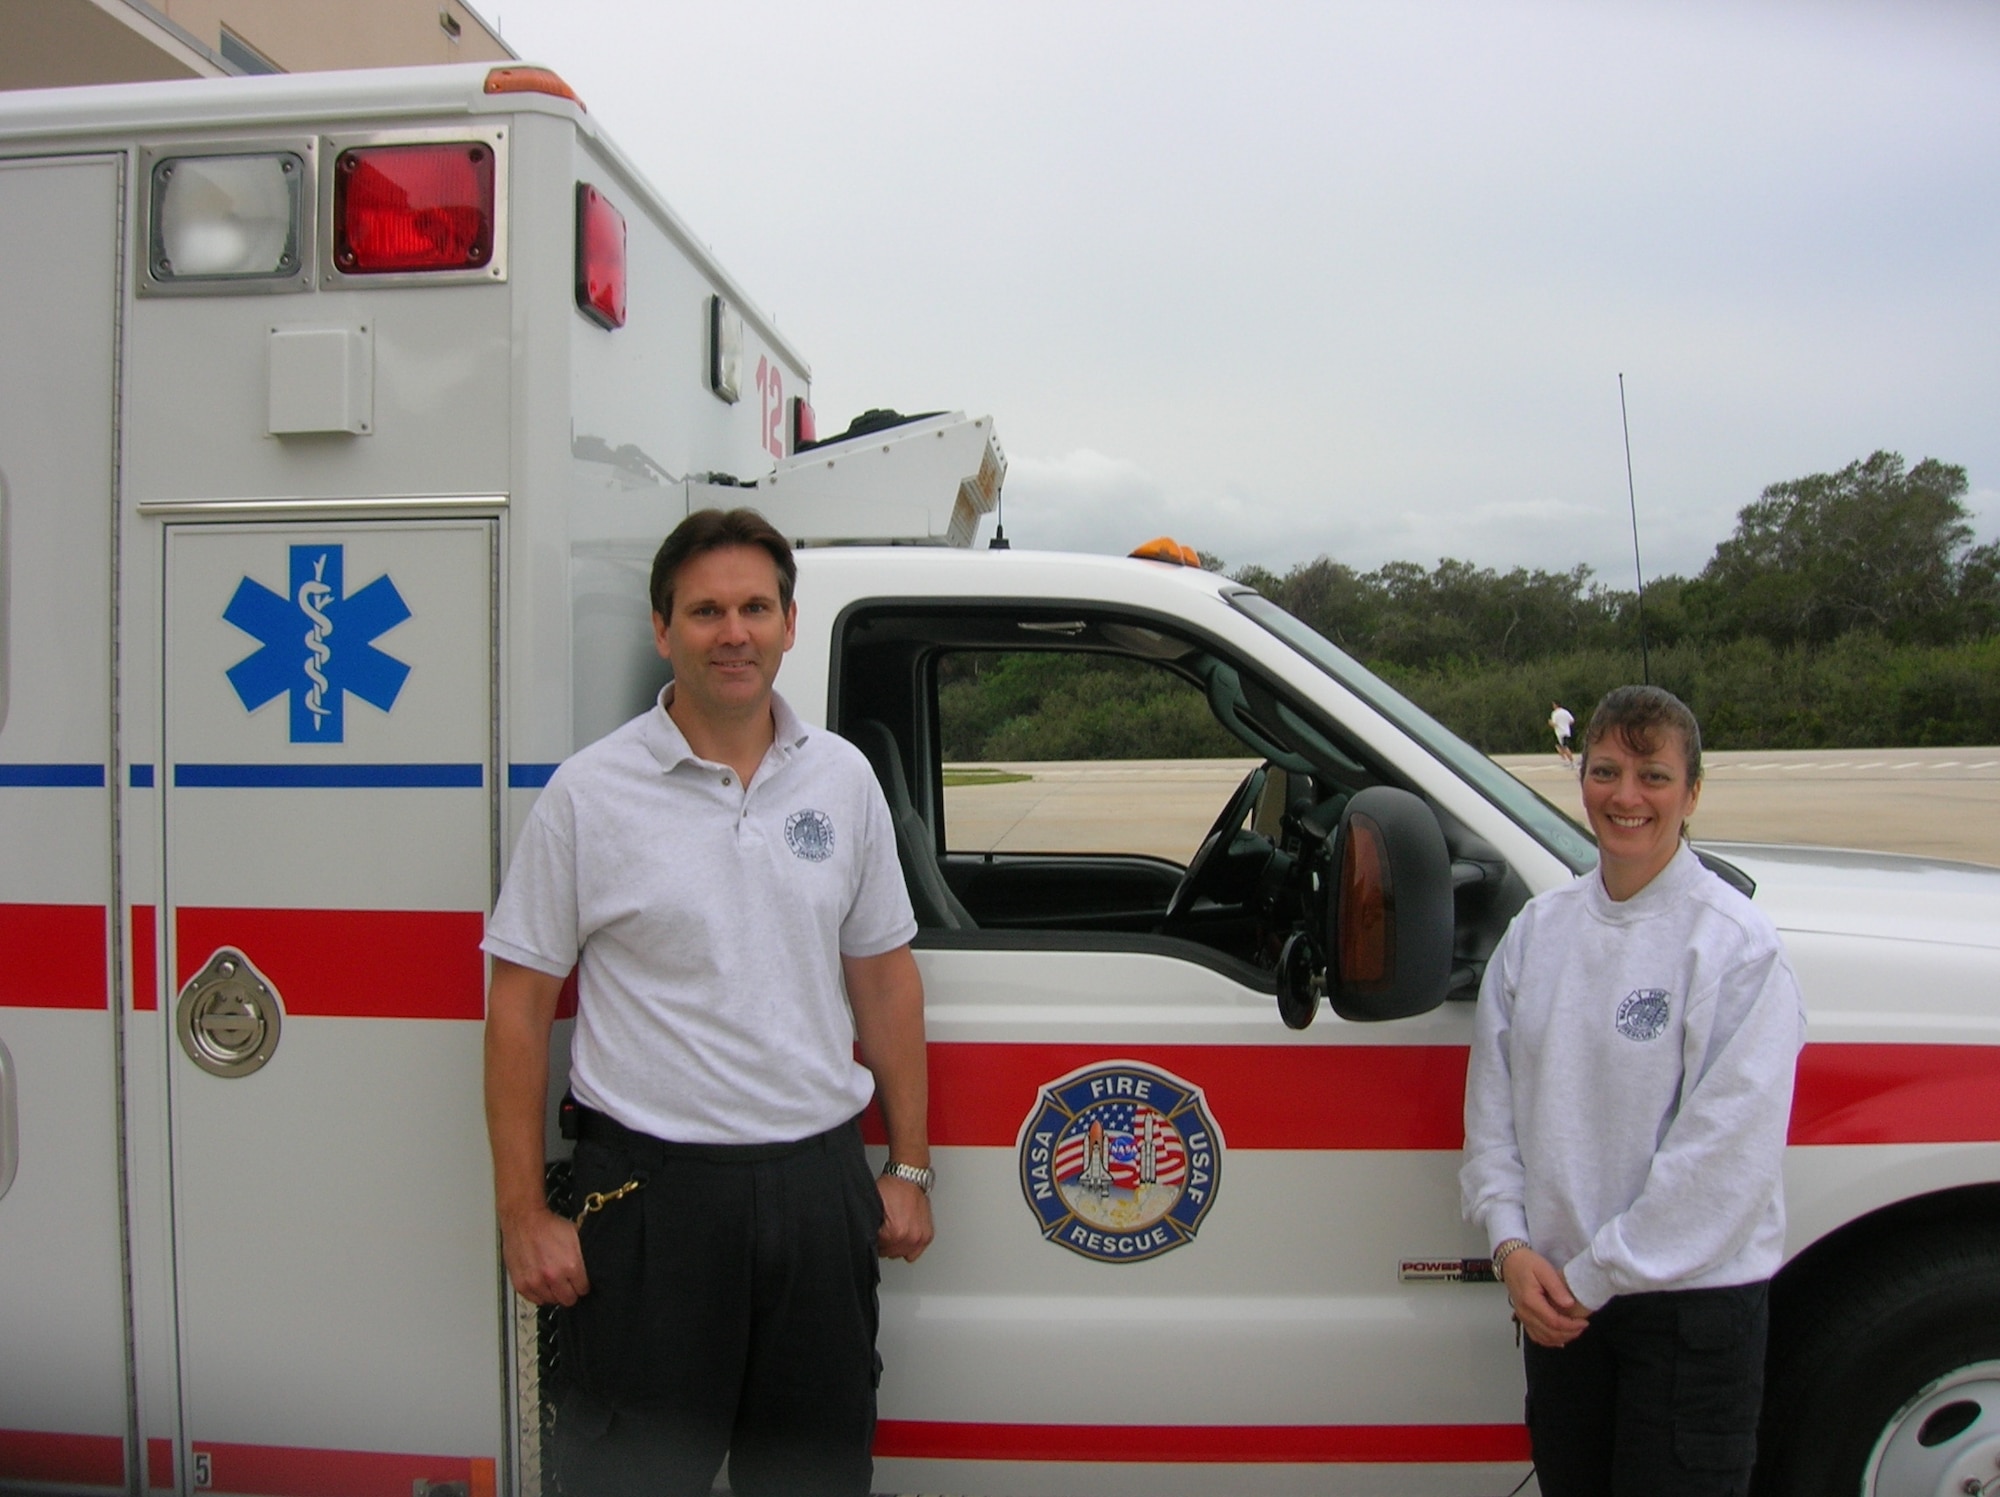 Dan Robiataille (left) and Michelle LaMoia of the Space Gateway Support Emergency Response Team with their ambulance at Cape Canaveral AFS. (Photo courtesy of Space Gateway Support)